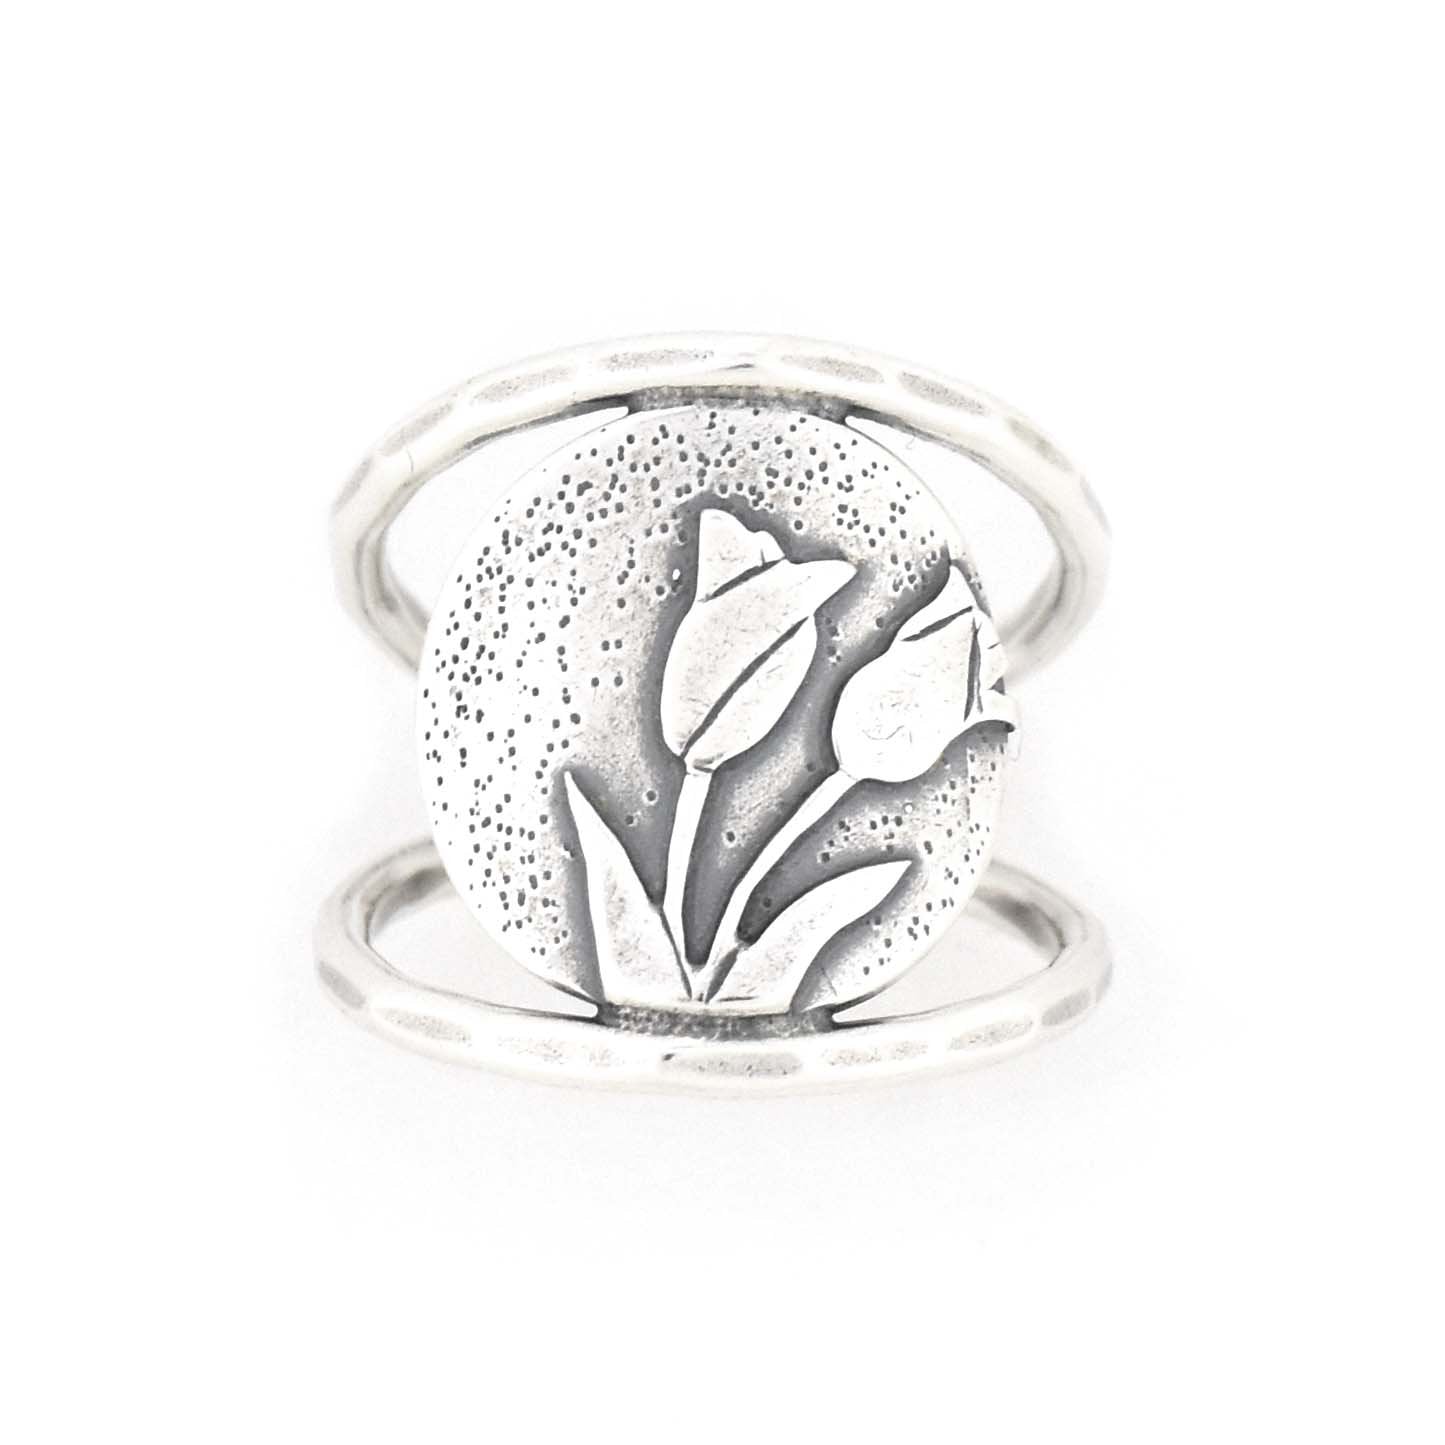 Spring Tulip Bouquet Ring - Ring  Select Size  4 5490 - handmade by Beth Millner Jewelry